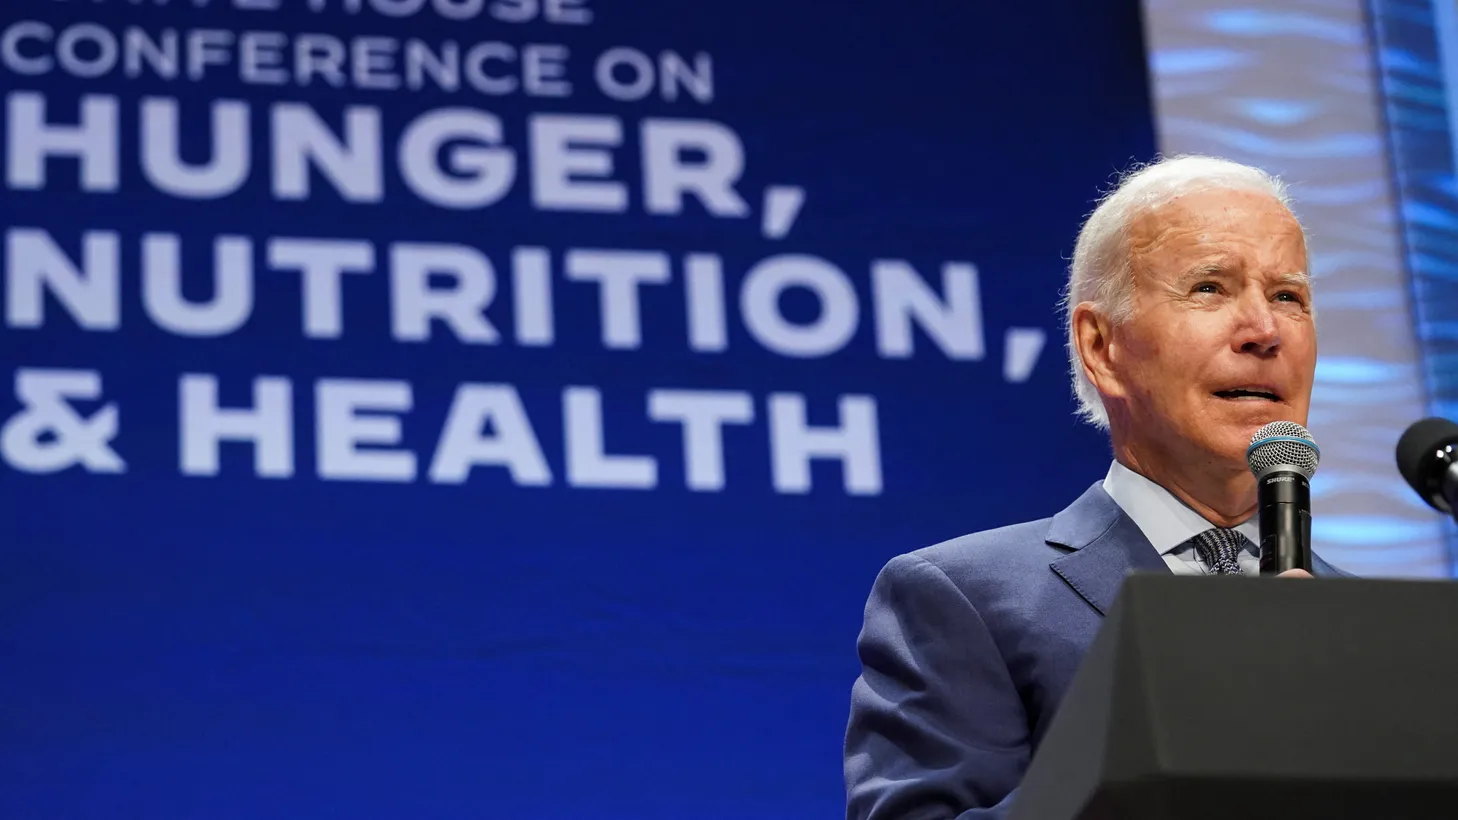 The Biden administration has the goal of ending the national hunger crisis by 2030.